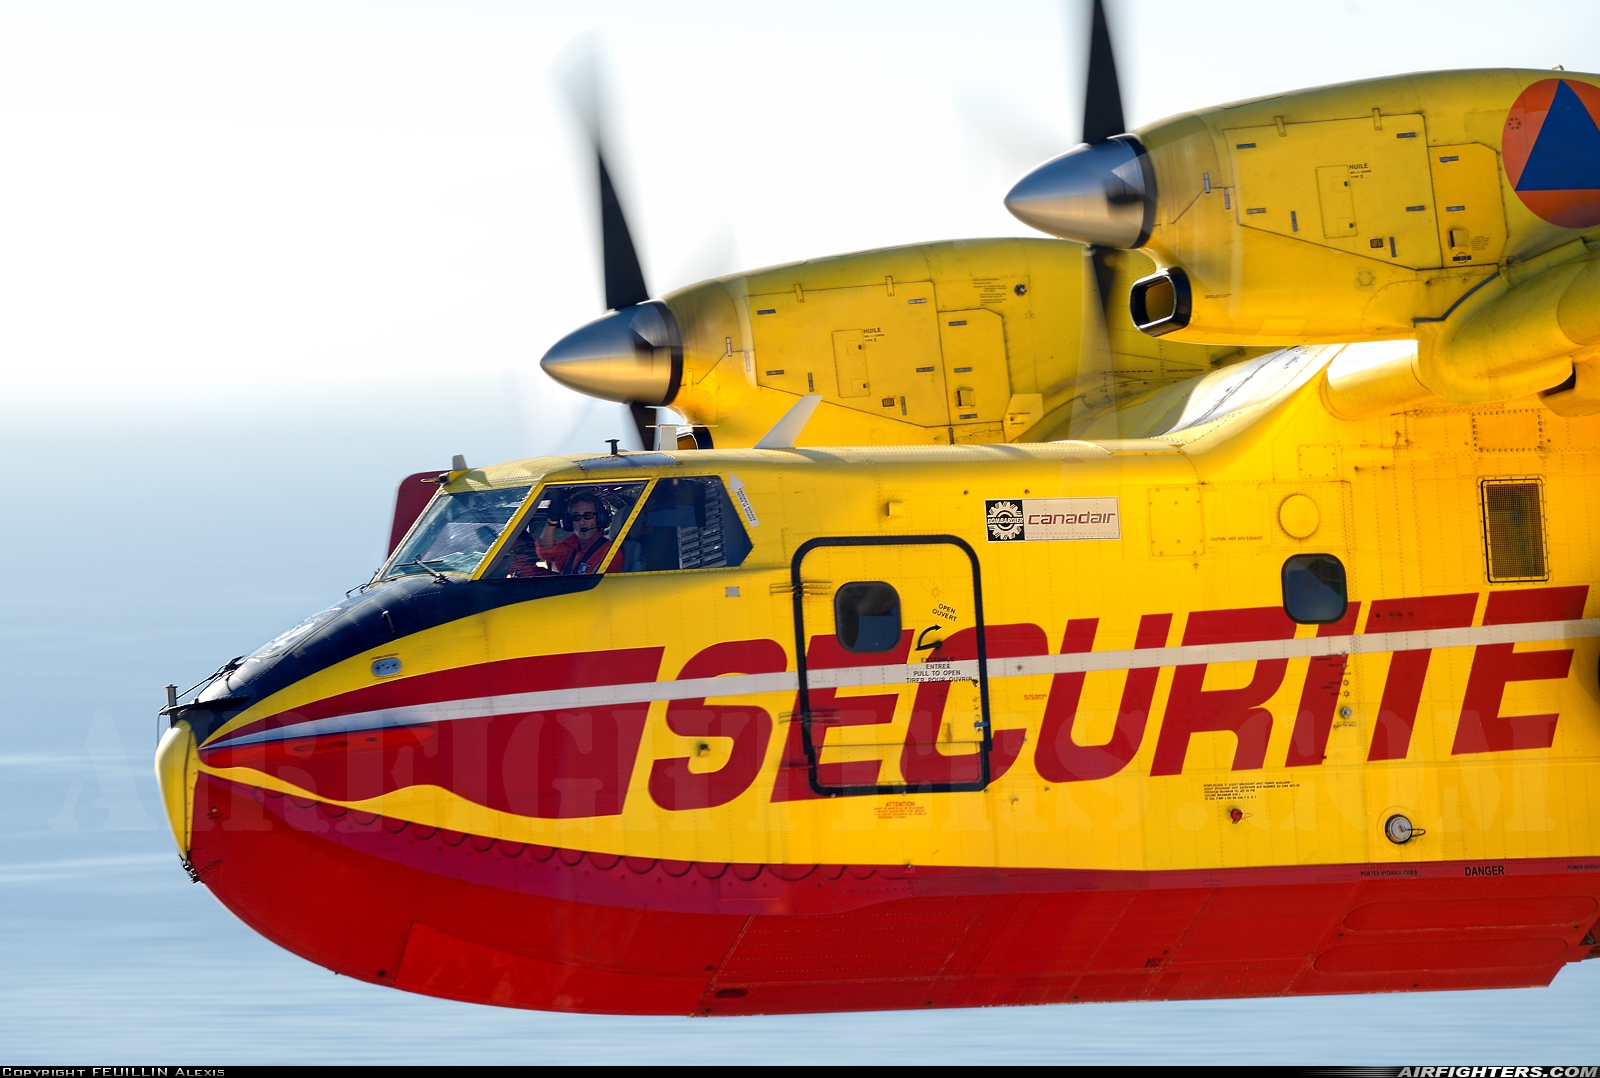 France - Securite Civile Canadair CL-415 F-ZBEU at Off-Airport - Marseille, France